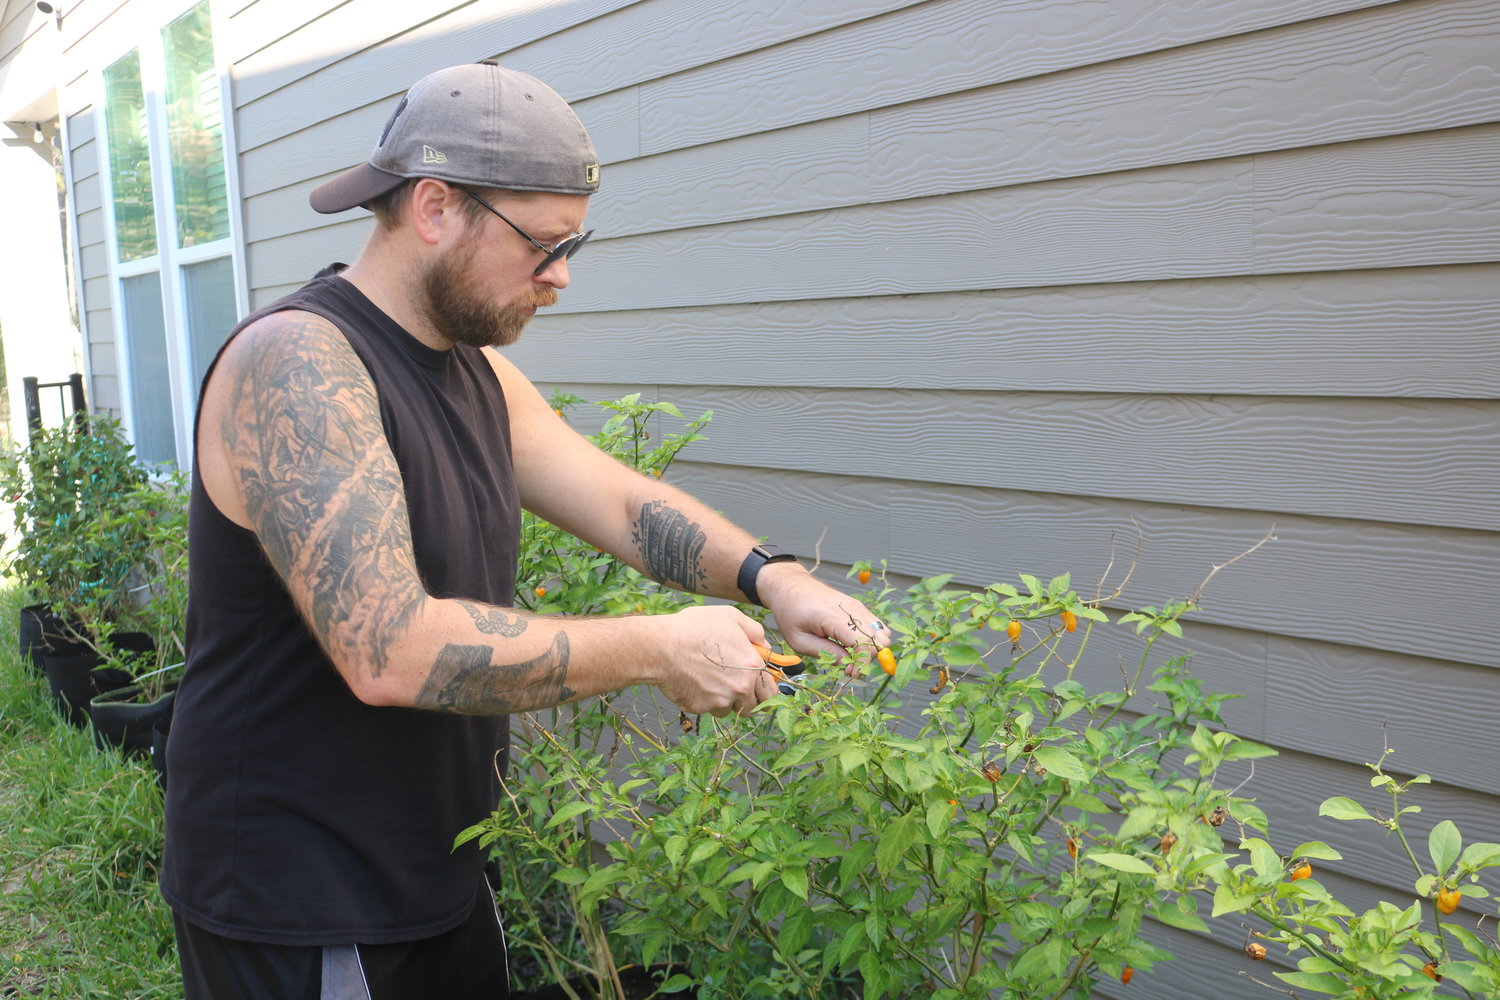 Dude Where’s My Sauce? creator Brett Kaminski tends to the pepper garden along the side of his house in Nocatee.